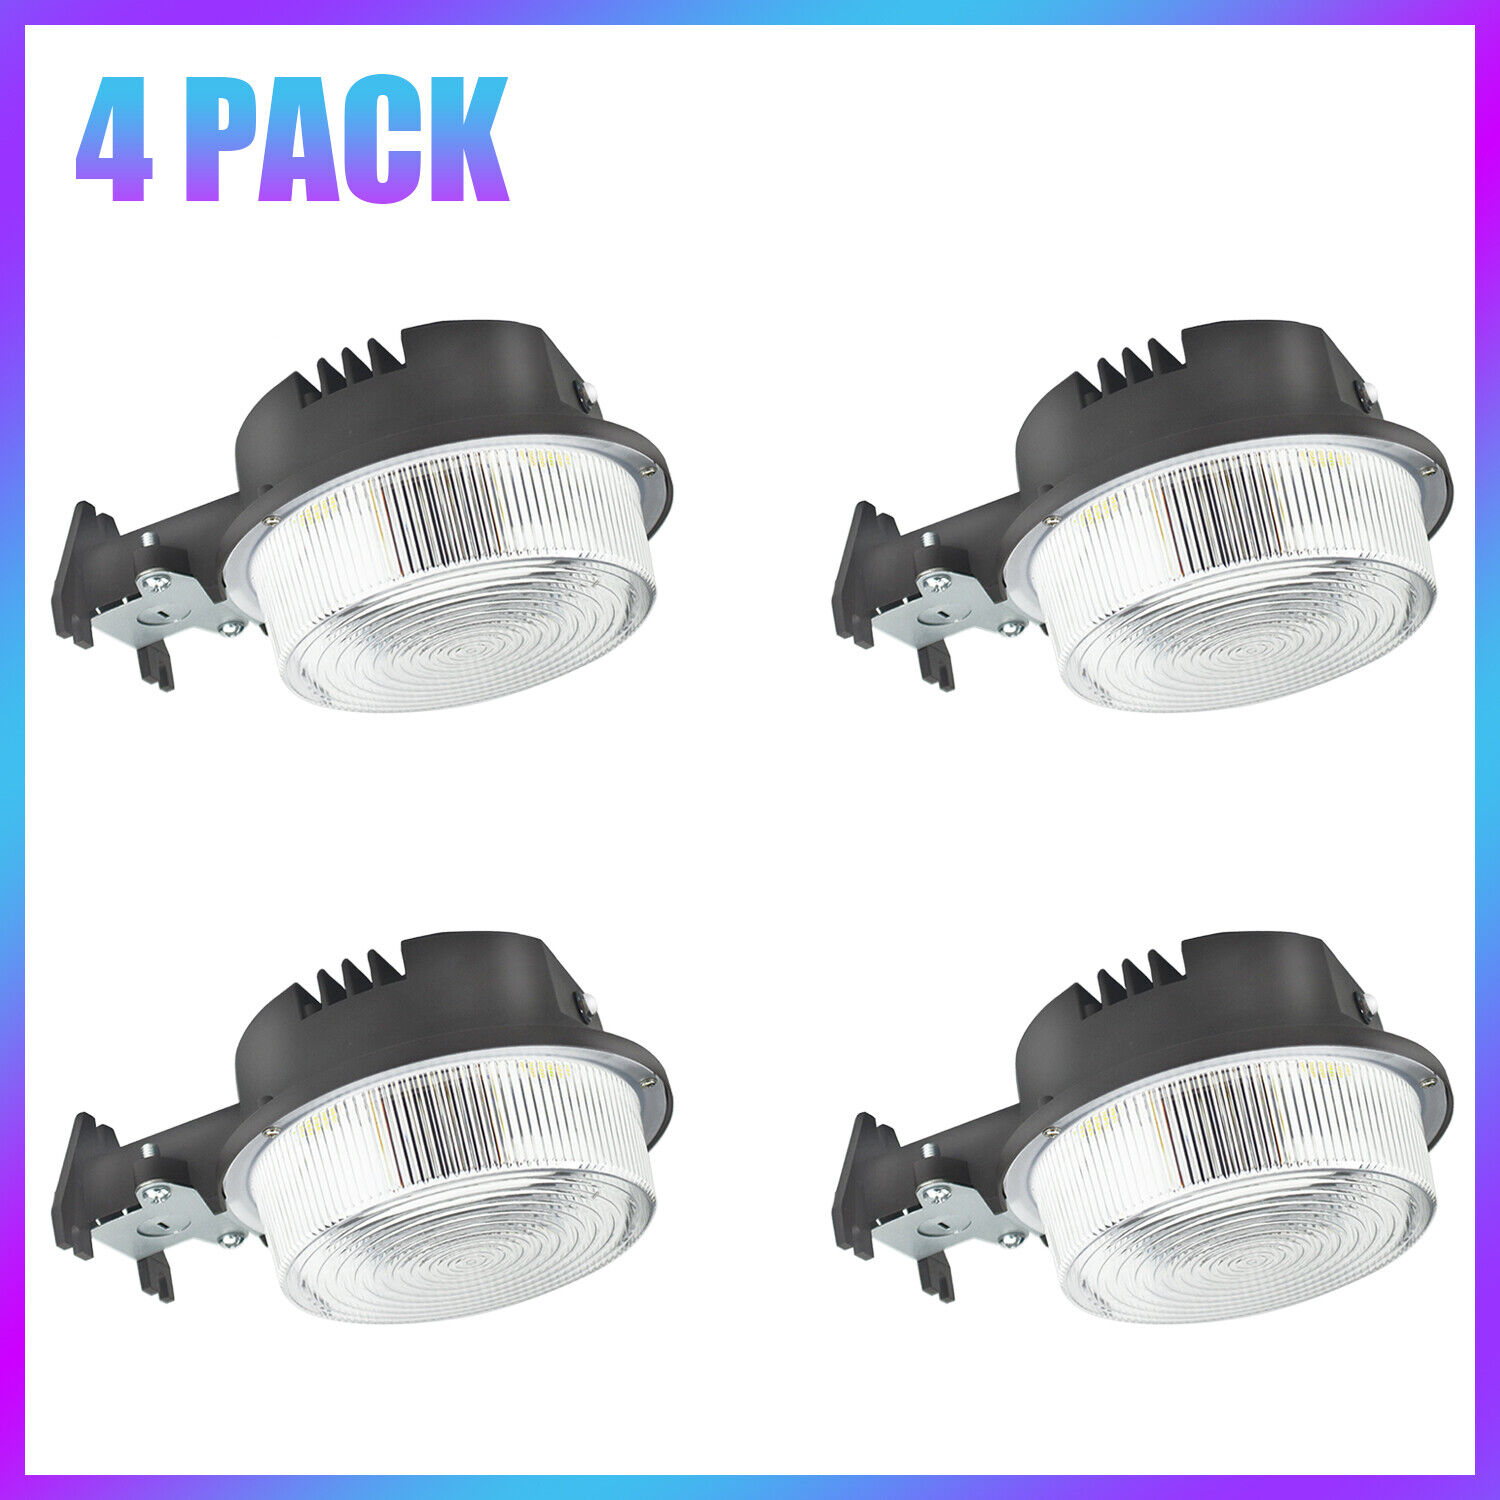 LED Security Area Lights 75 Watts - Barn Light Dusk to Dawn with Photocell 4Pack